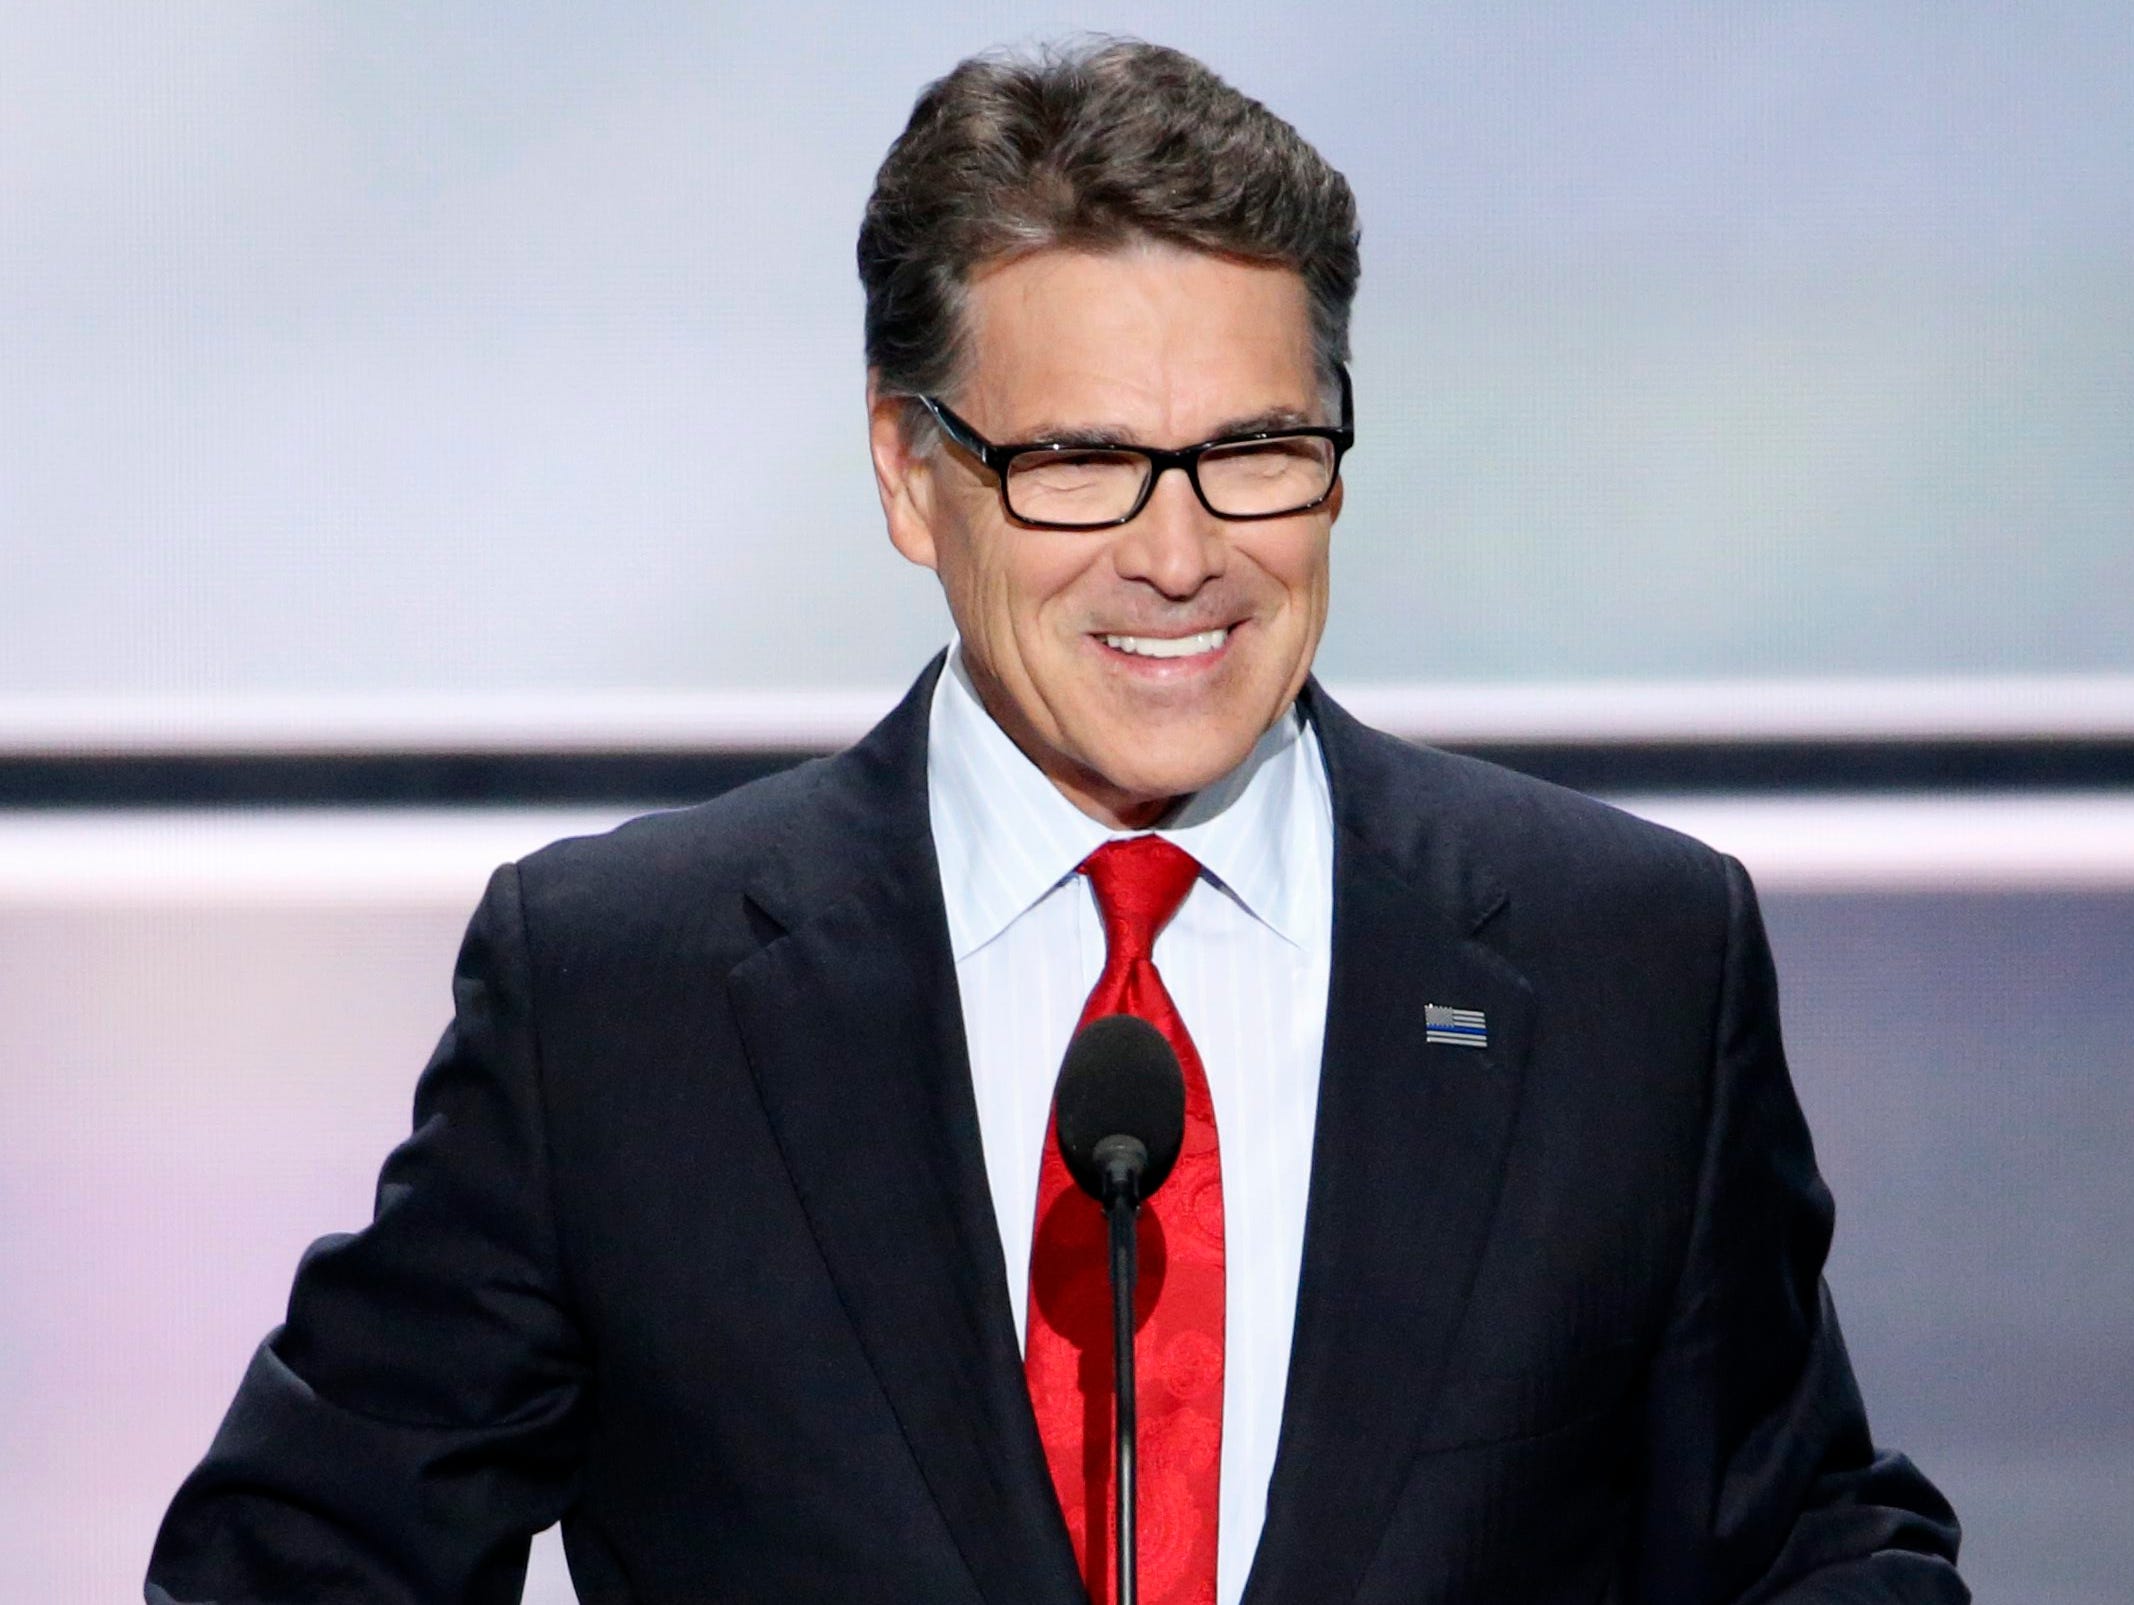 Rick Perry, 66, is the longest-serving governor of Texas and a Republican primary presidential candidate in 2012 and 2016.